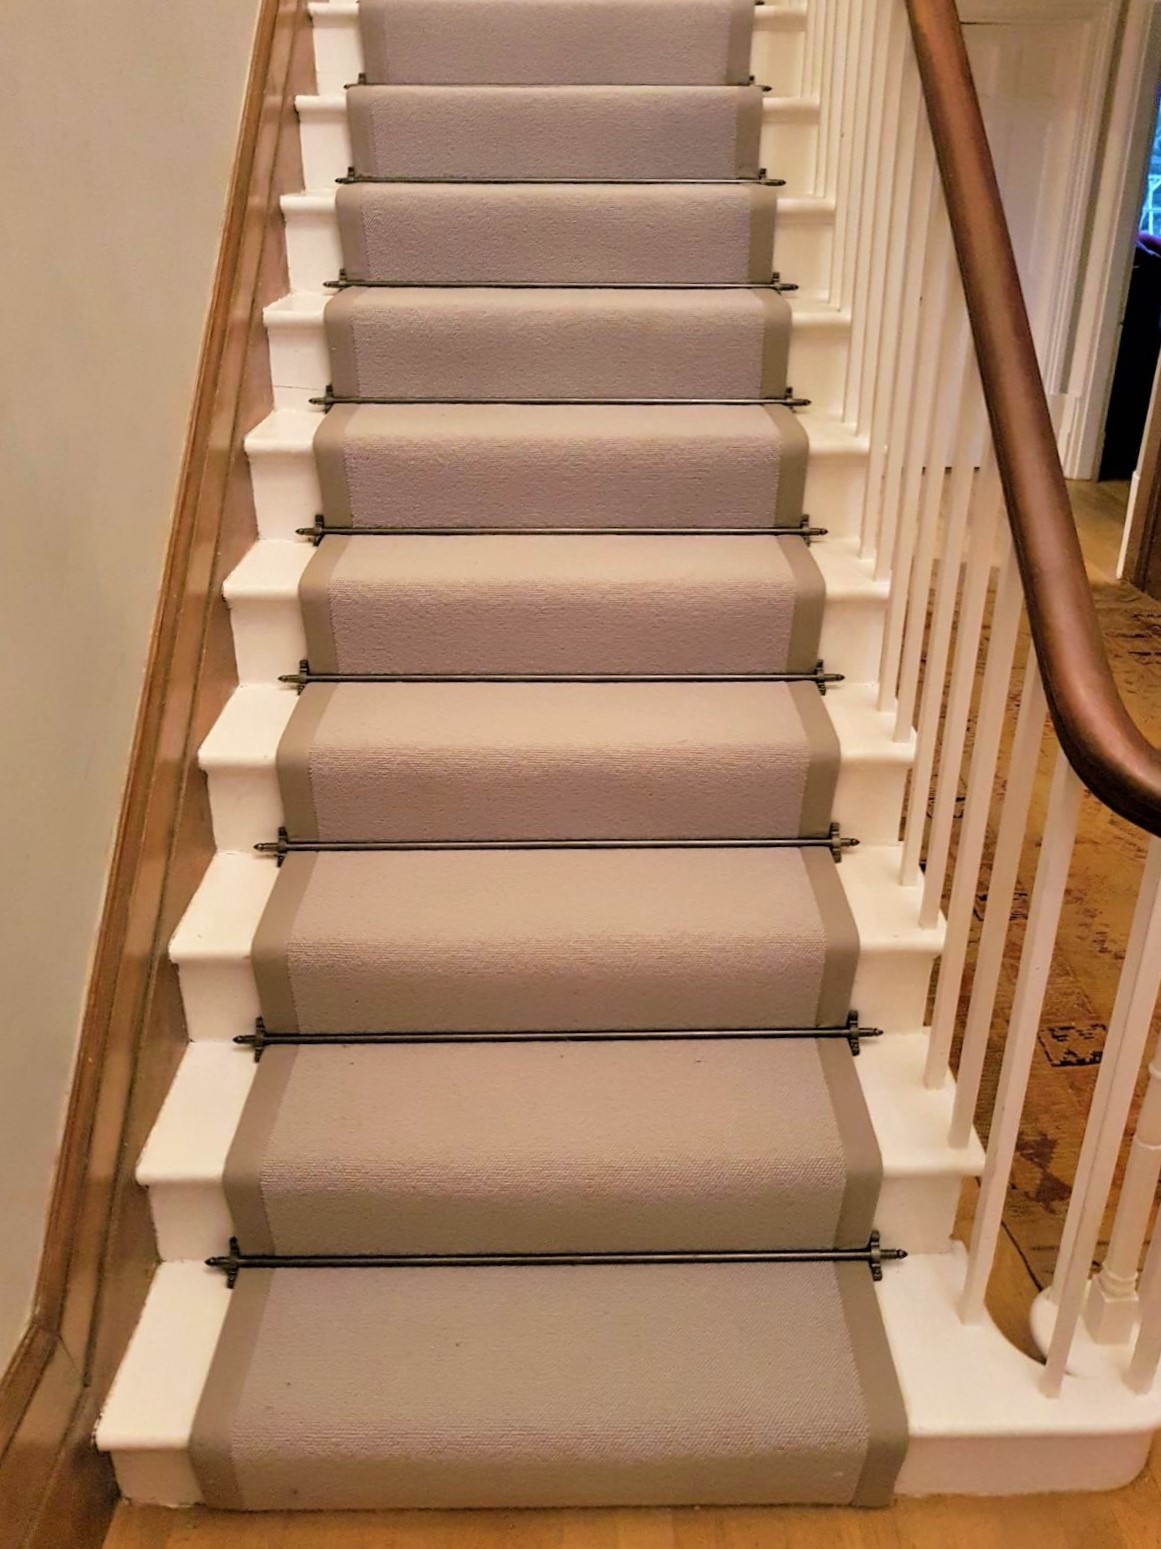 Beige Stair Runner with Contrast Binding and Stairrods